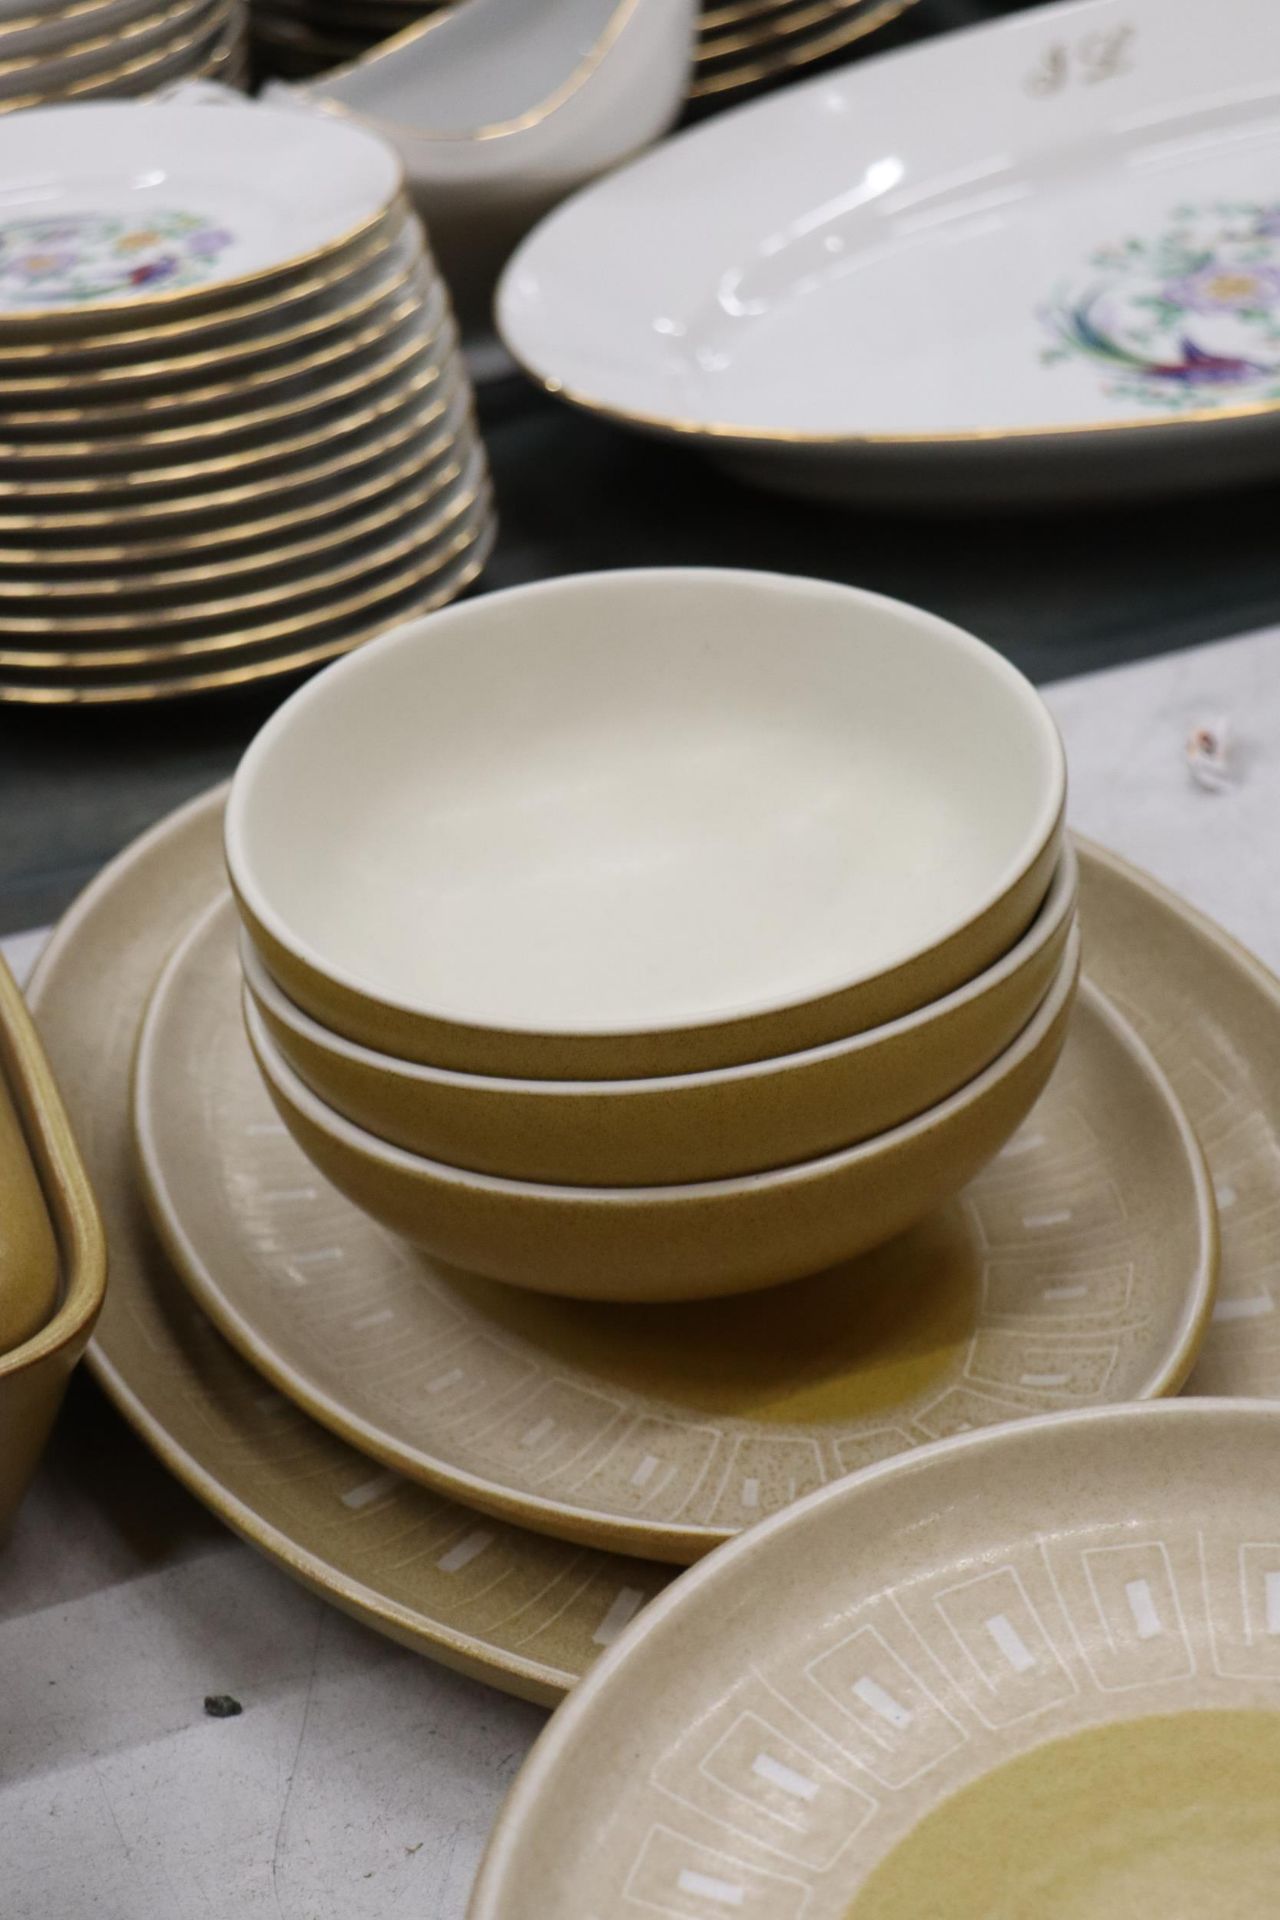 A DENBY MUSTARD COLOURED DINNER SERVICE, TO INCLUDE VARIOUS SIZES OF PLATES, A CASSEROLE DISH, - Image 7 of 9